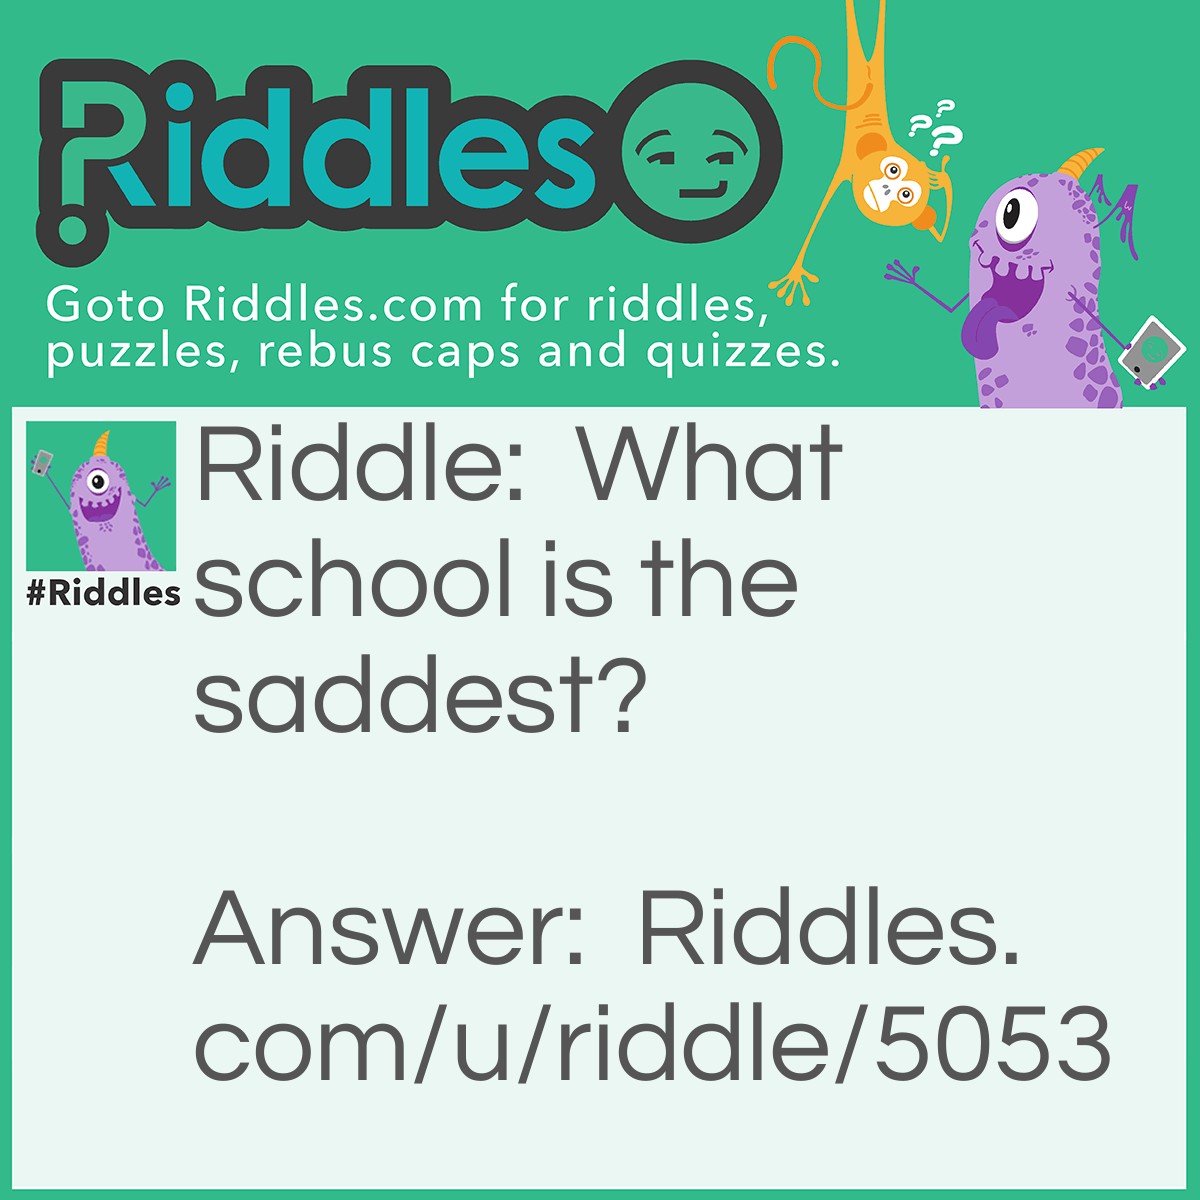 Riddle: What school is the saddest? Answer: Middle school because it's small, not high!